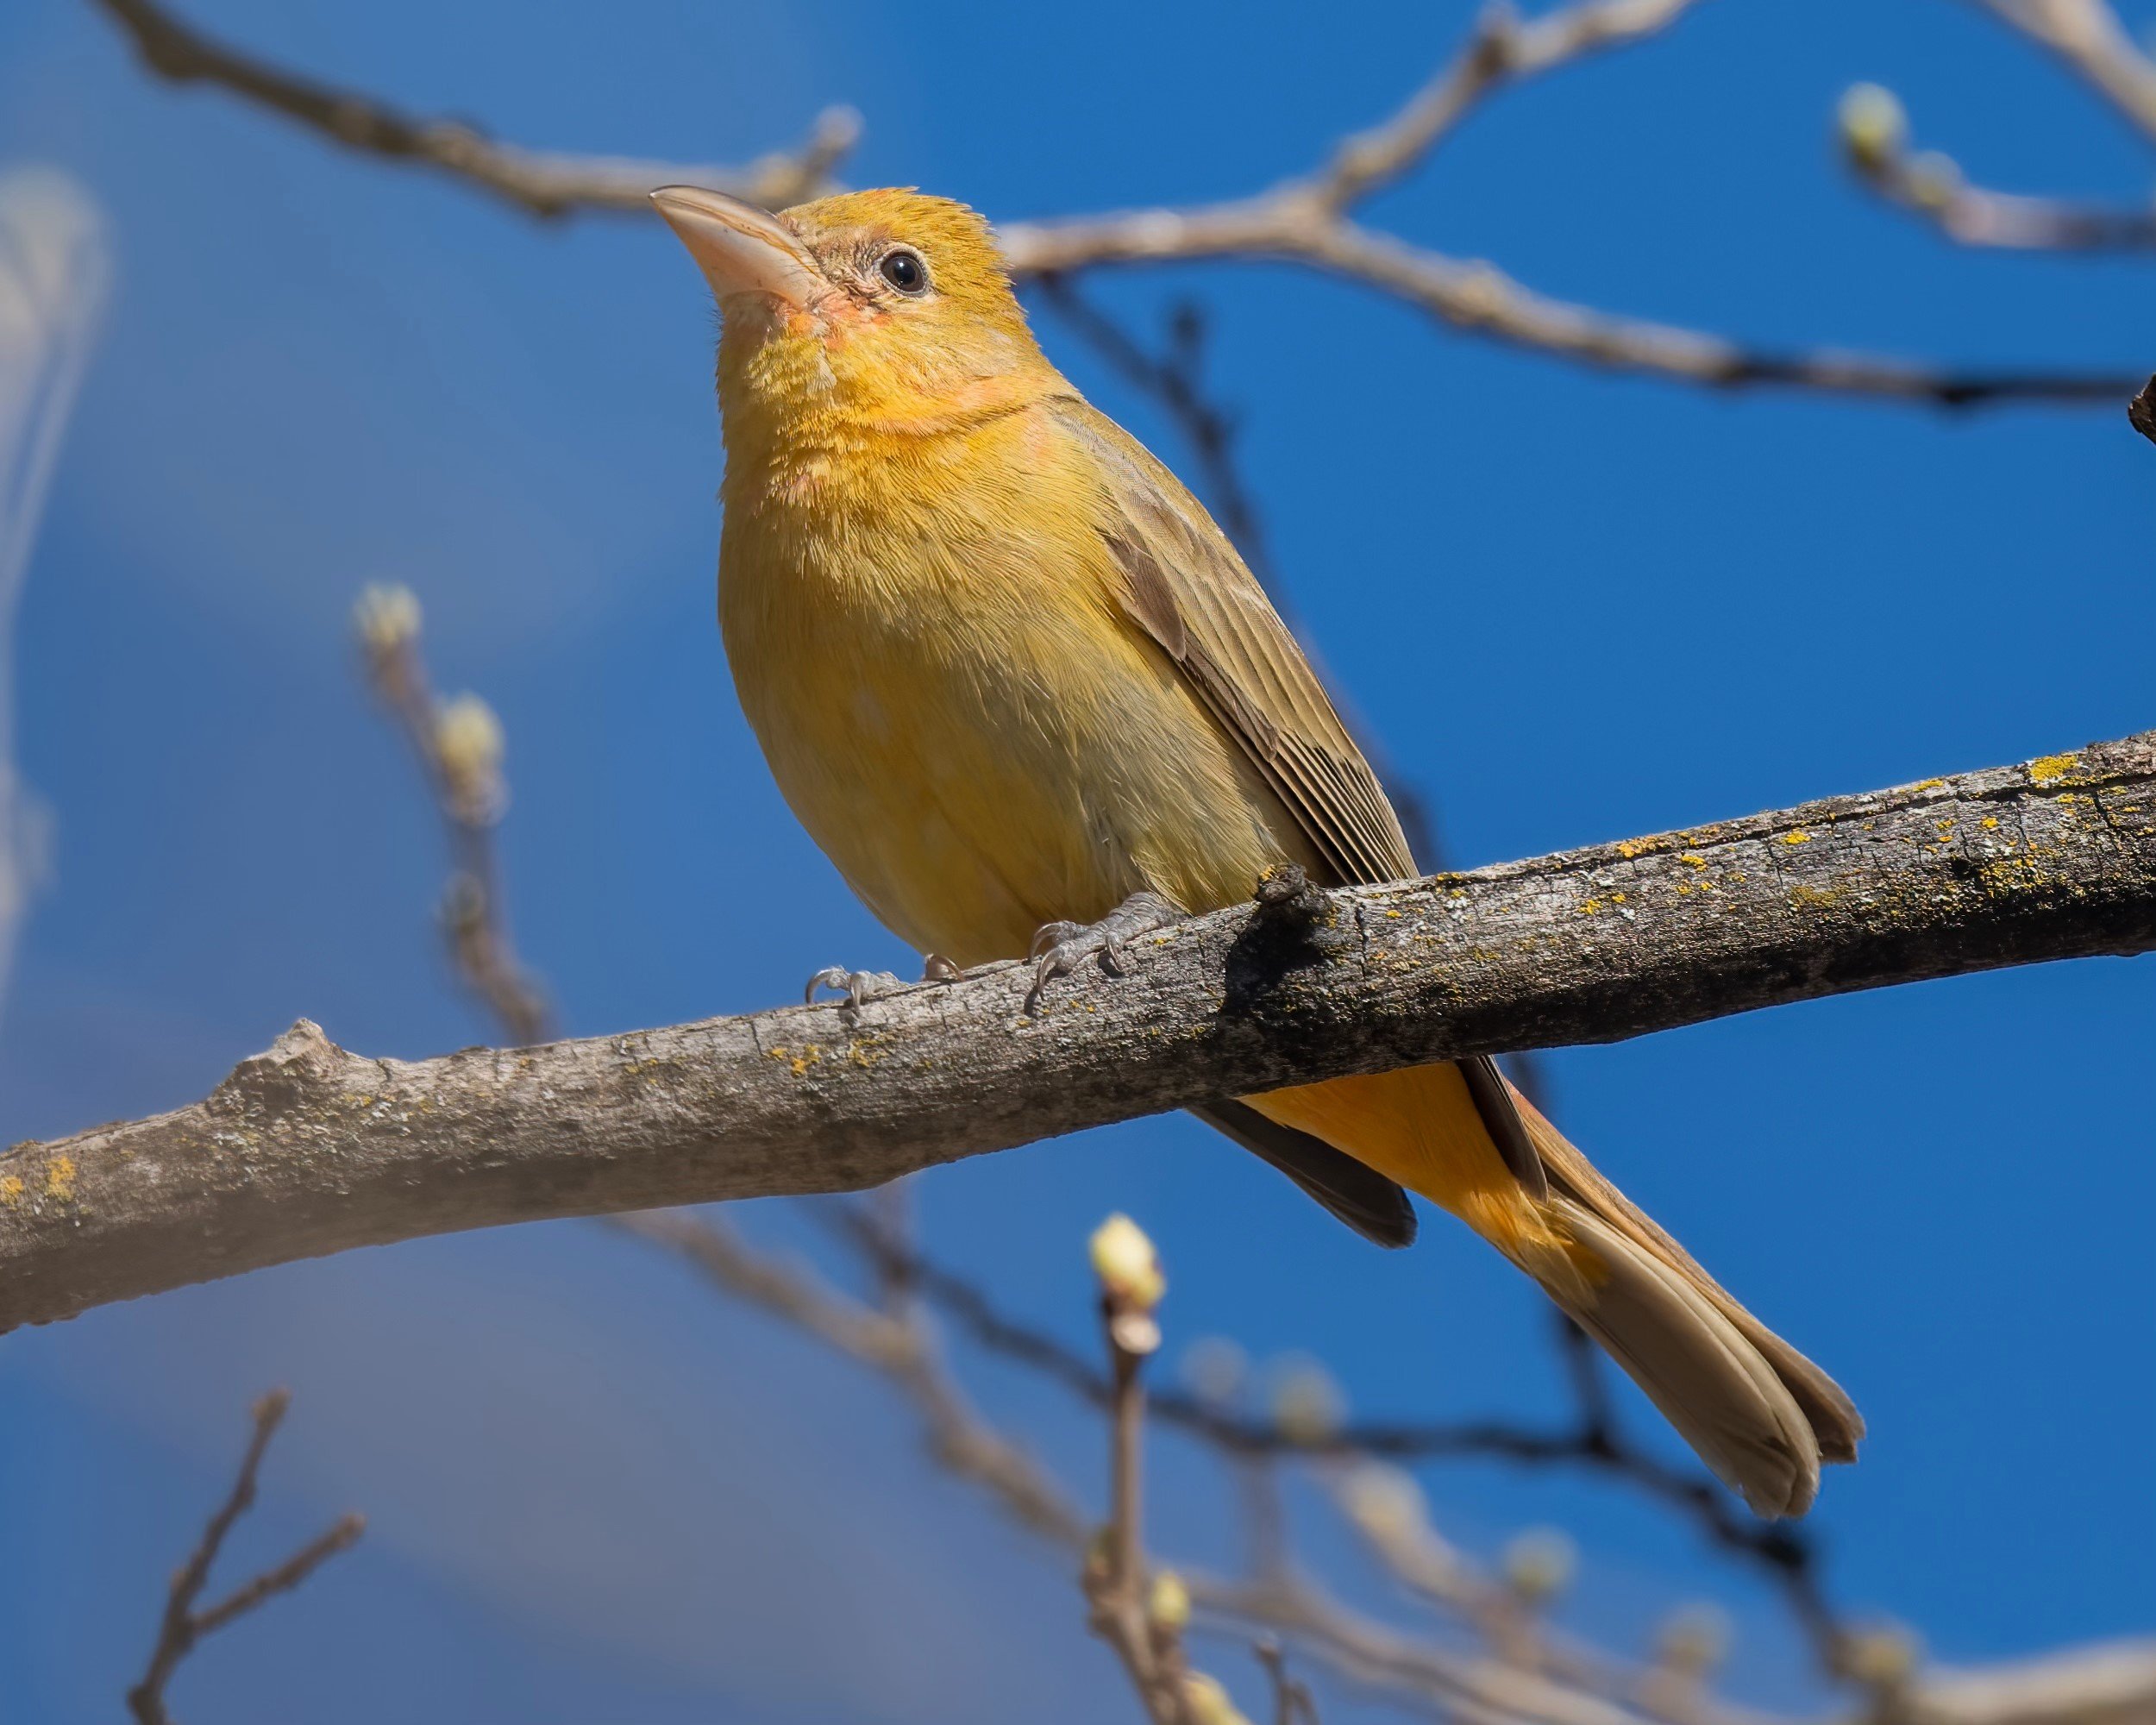 Summer Tanager, Female